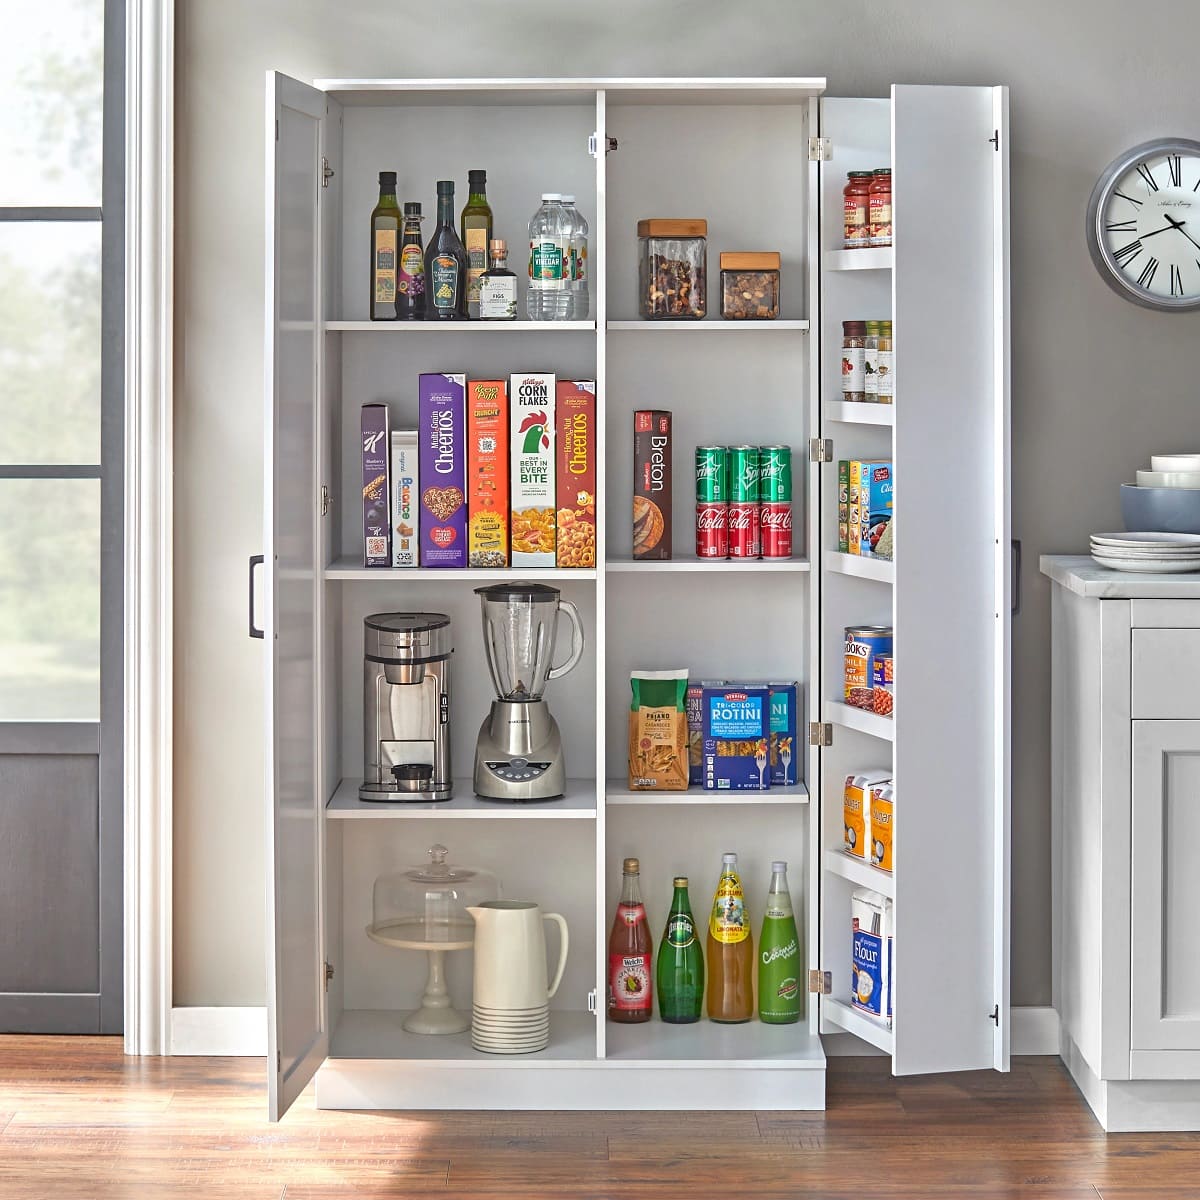 What Is A Standard Size For A Kitchen Pantry Cabinet